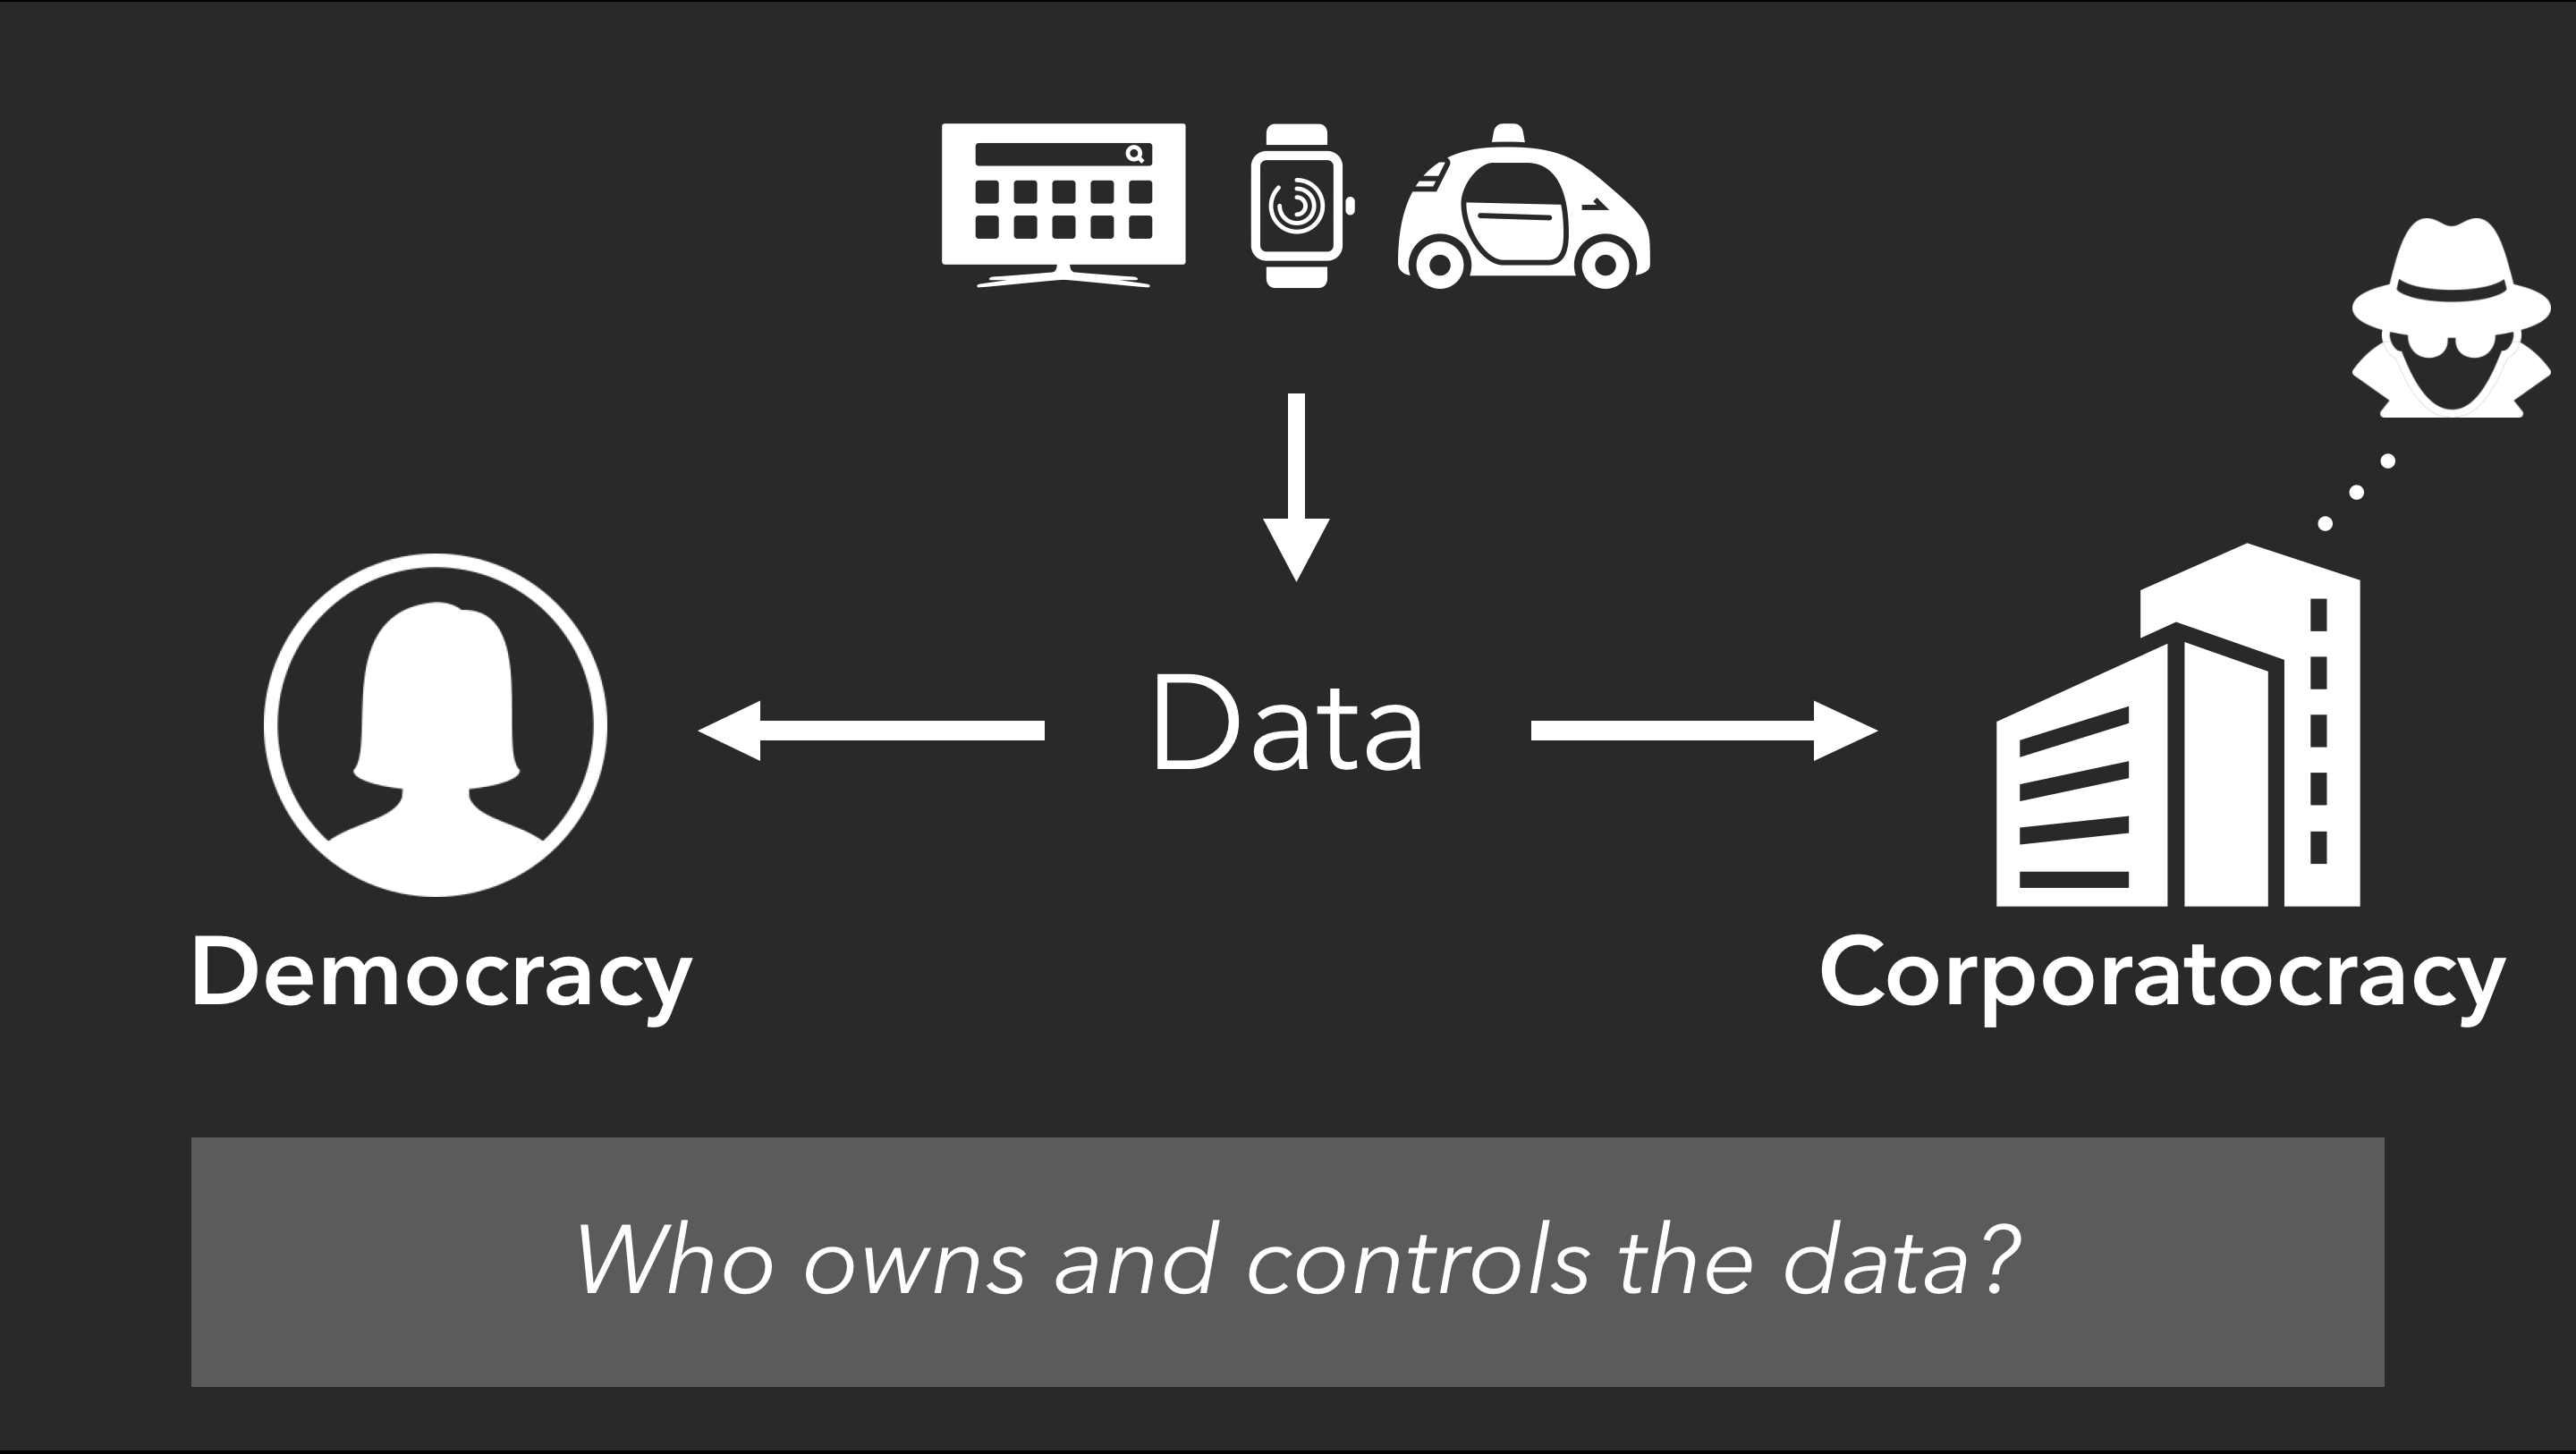 Today, our data is owned by corporations and by extension made available to governments. We live in a corporatocracy.